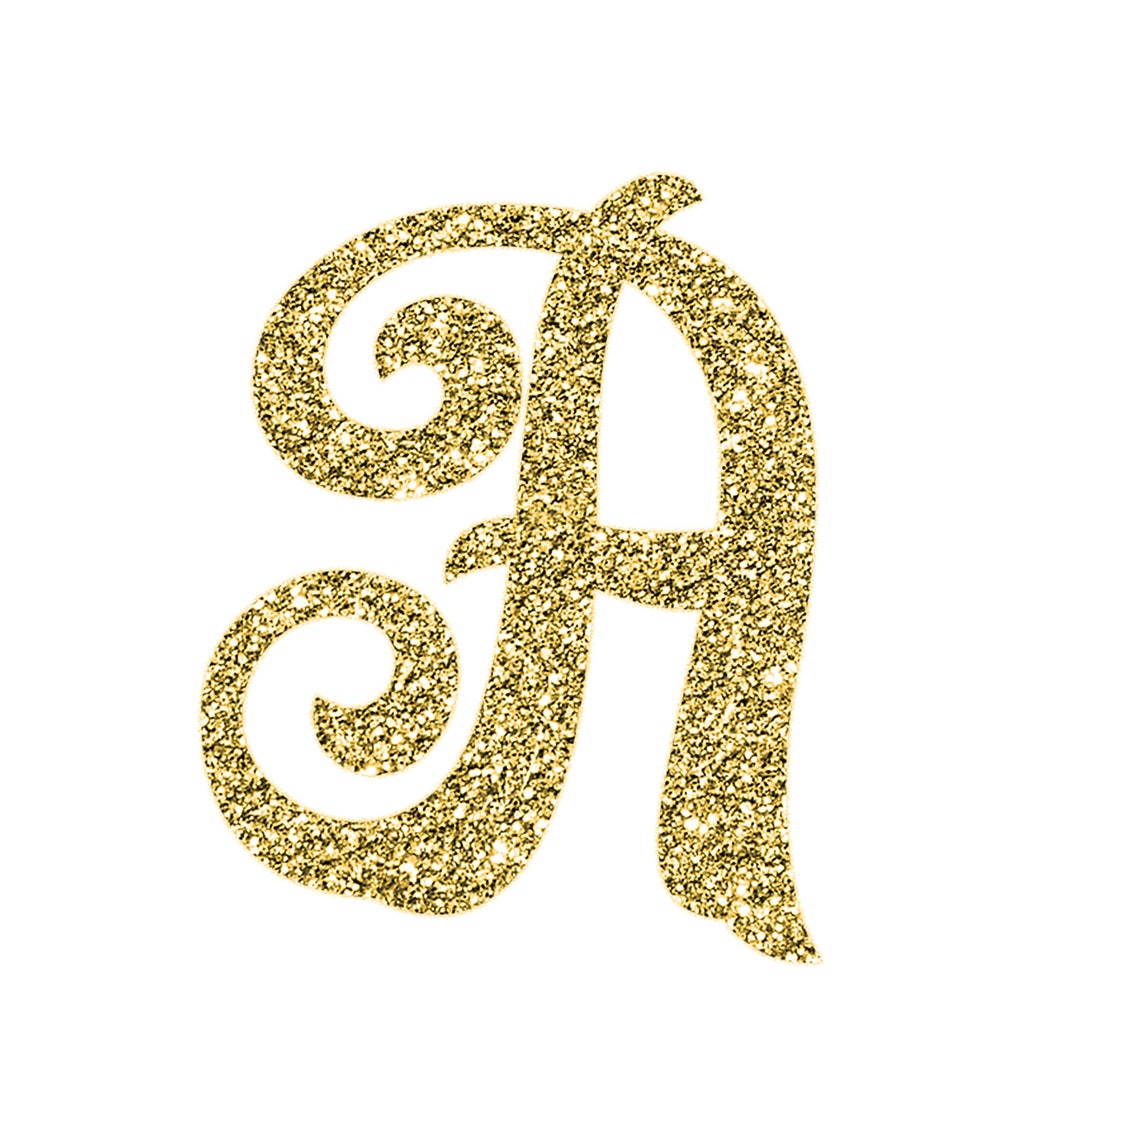 Printable Gold Glitter Letters - Printable Word Searches